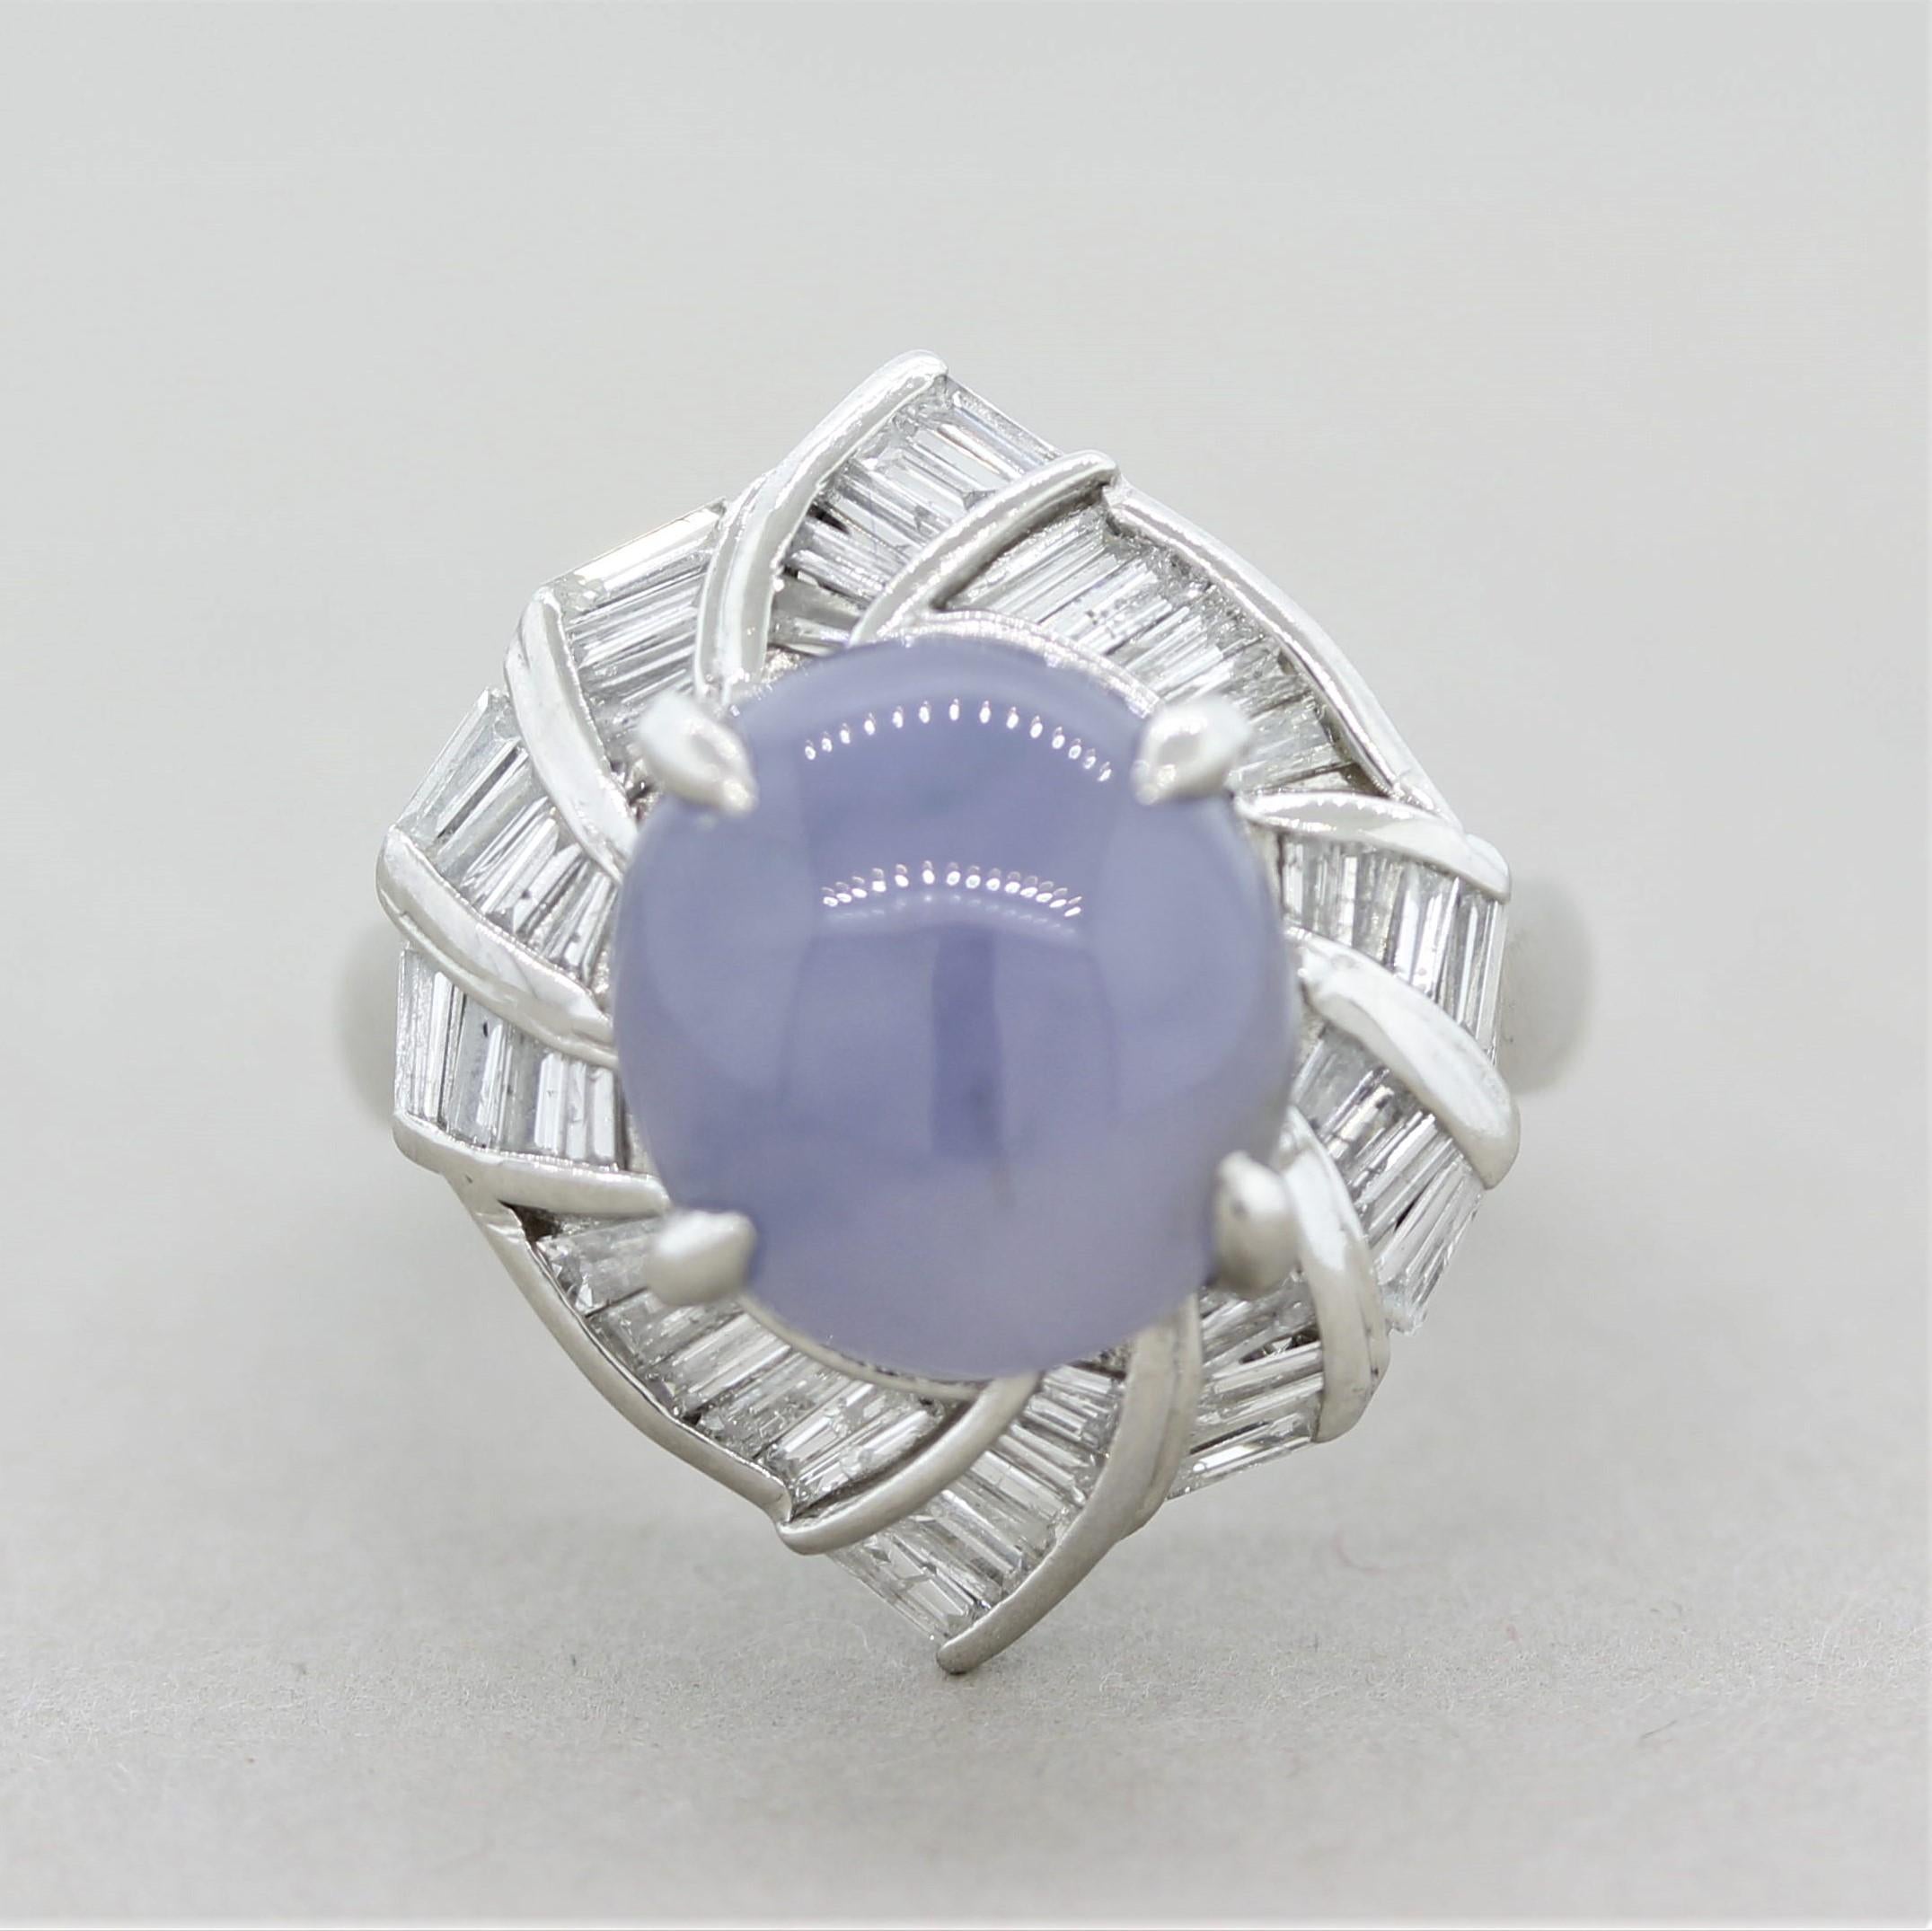 A unique and natural colored piece of jadeite jade! The violet/blue colored jade weighs 6.73 carats and has a smooth sleek polish. It is accented by 1.20 carats of baguette-cut diamonds which are set in a swirling pattern around the jade.